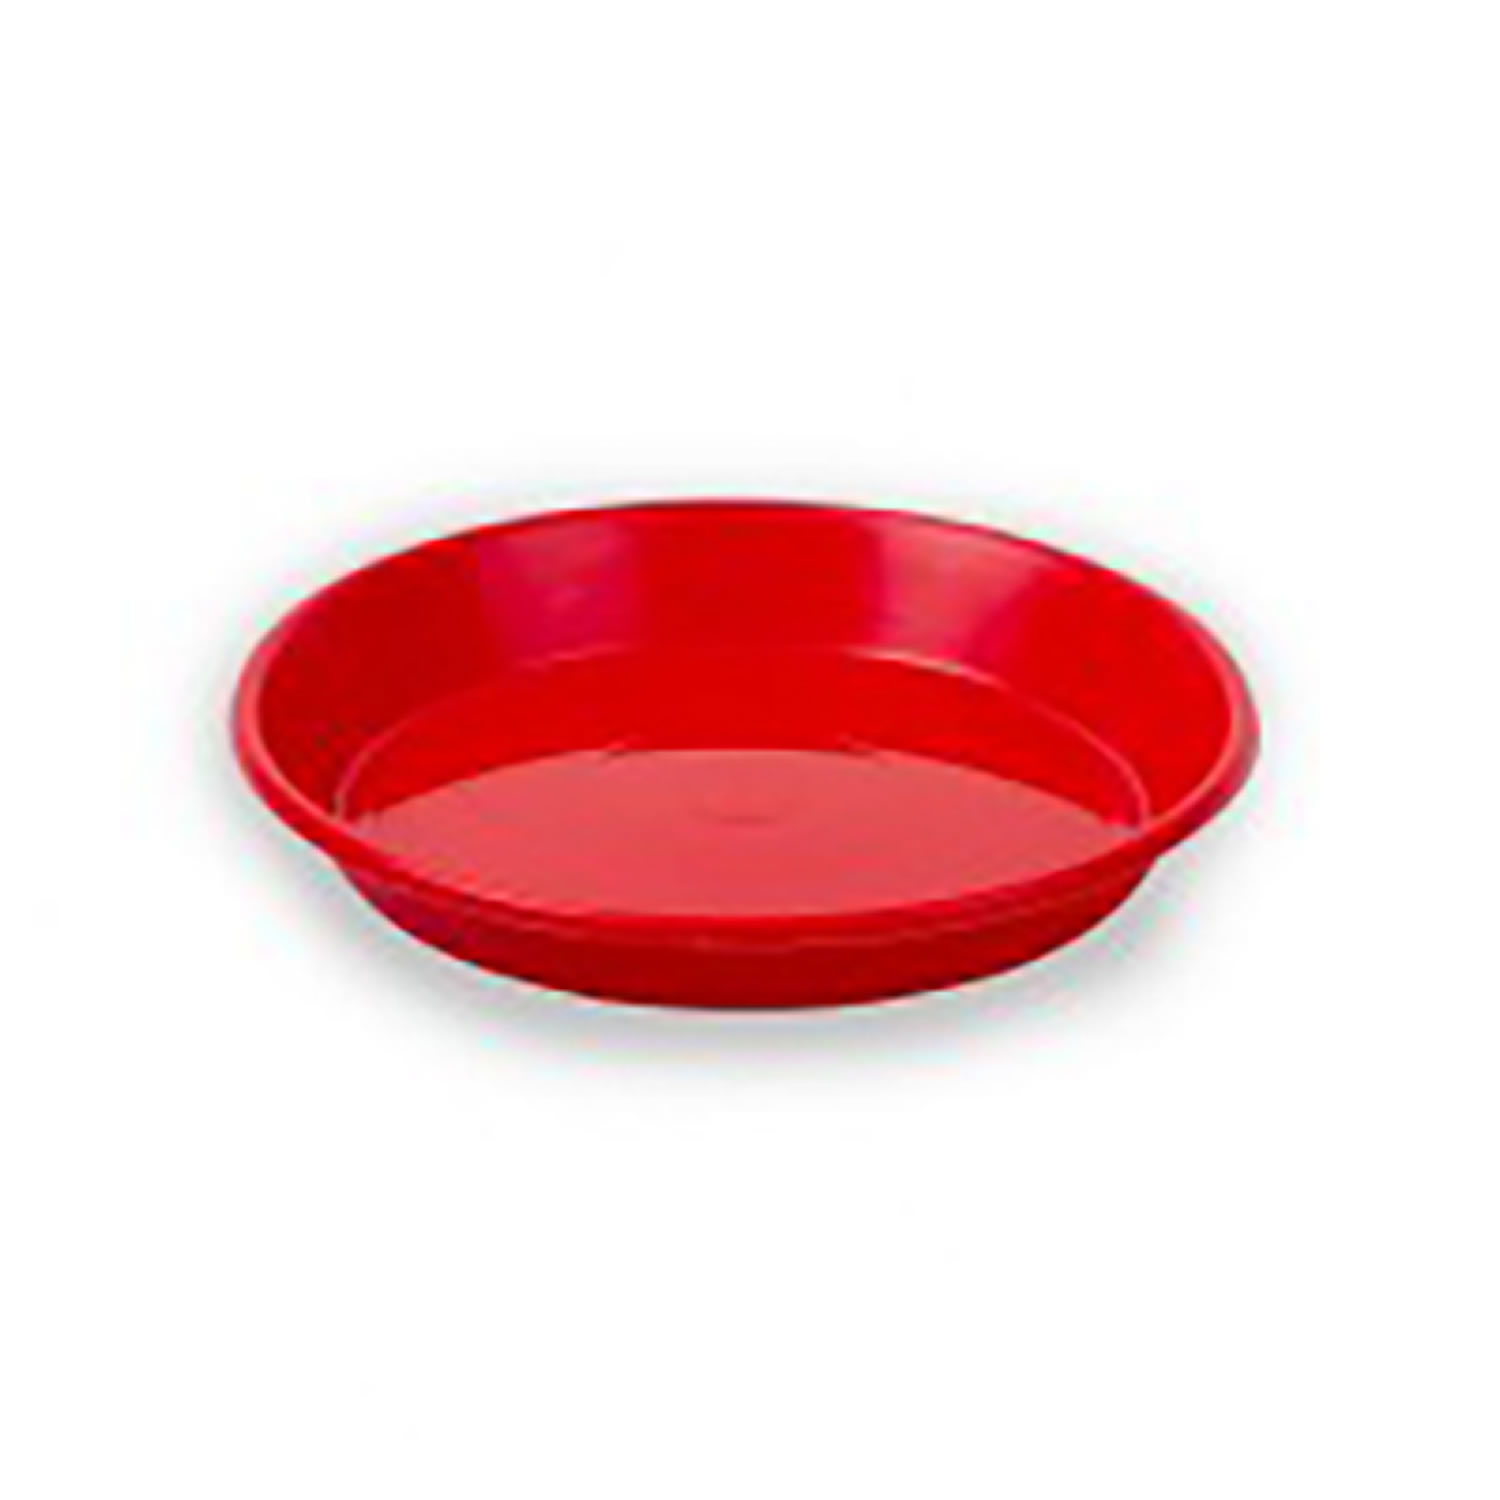 ETON CHICK TRAY POULTRY FEEDER SMALL   RED